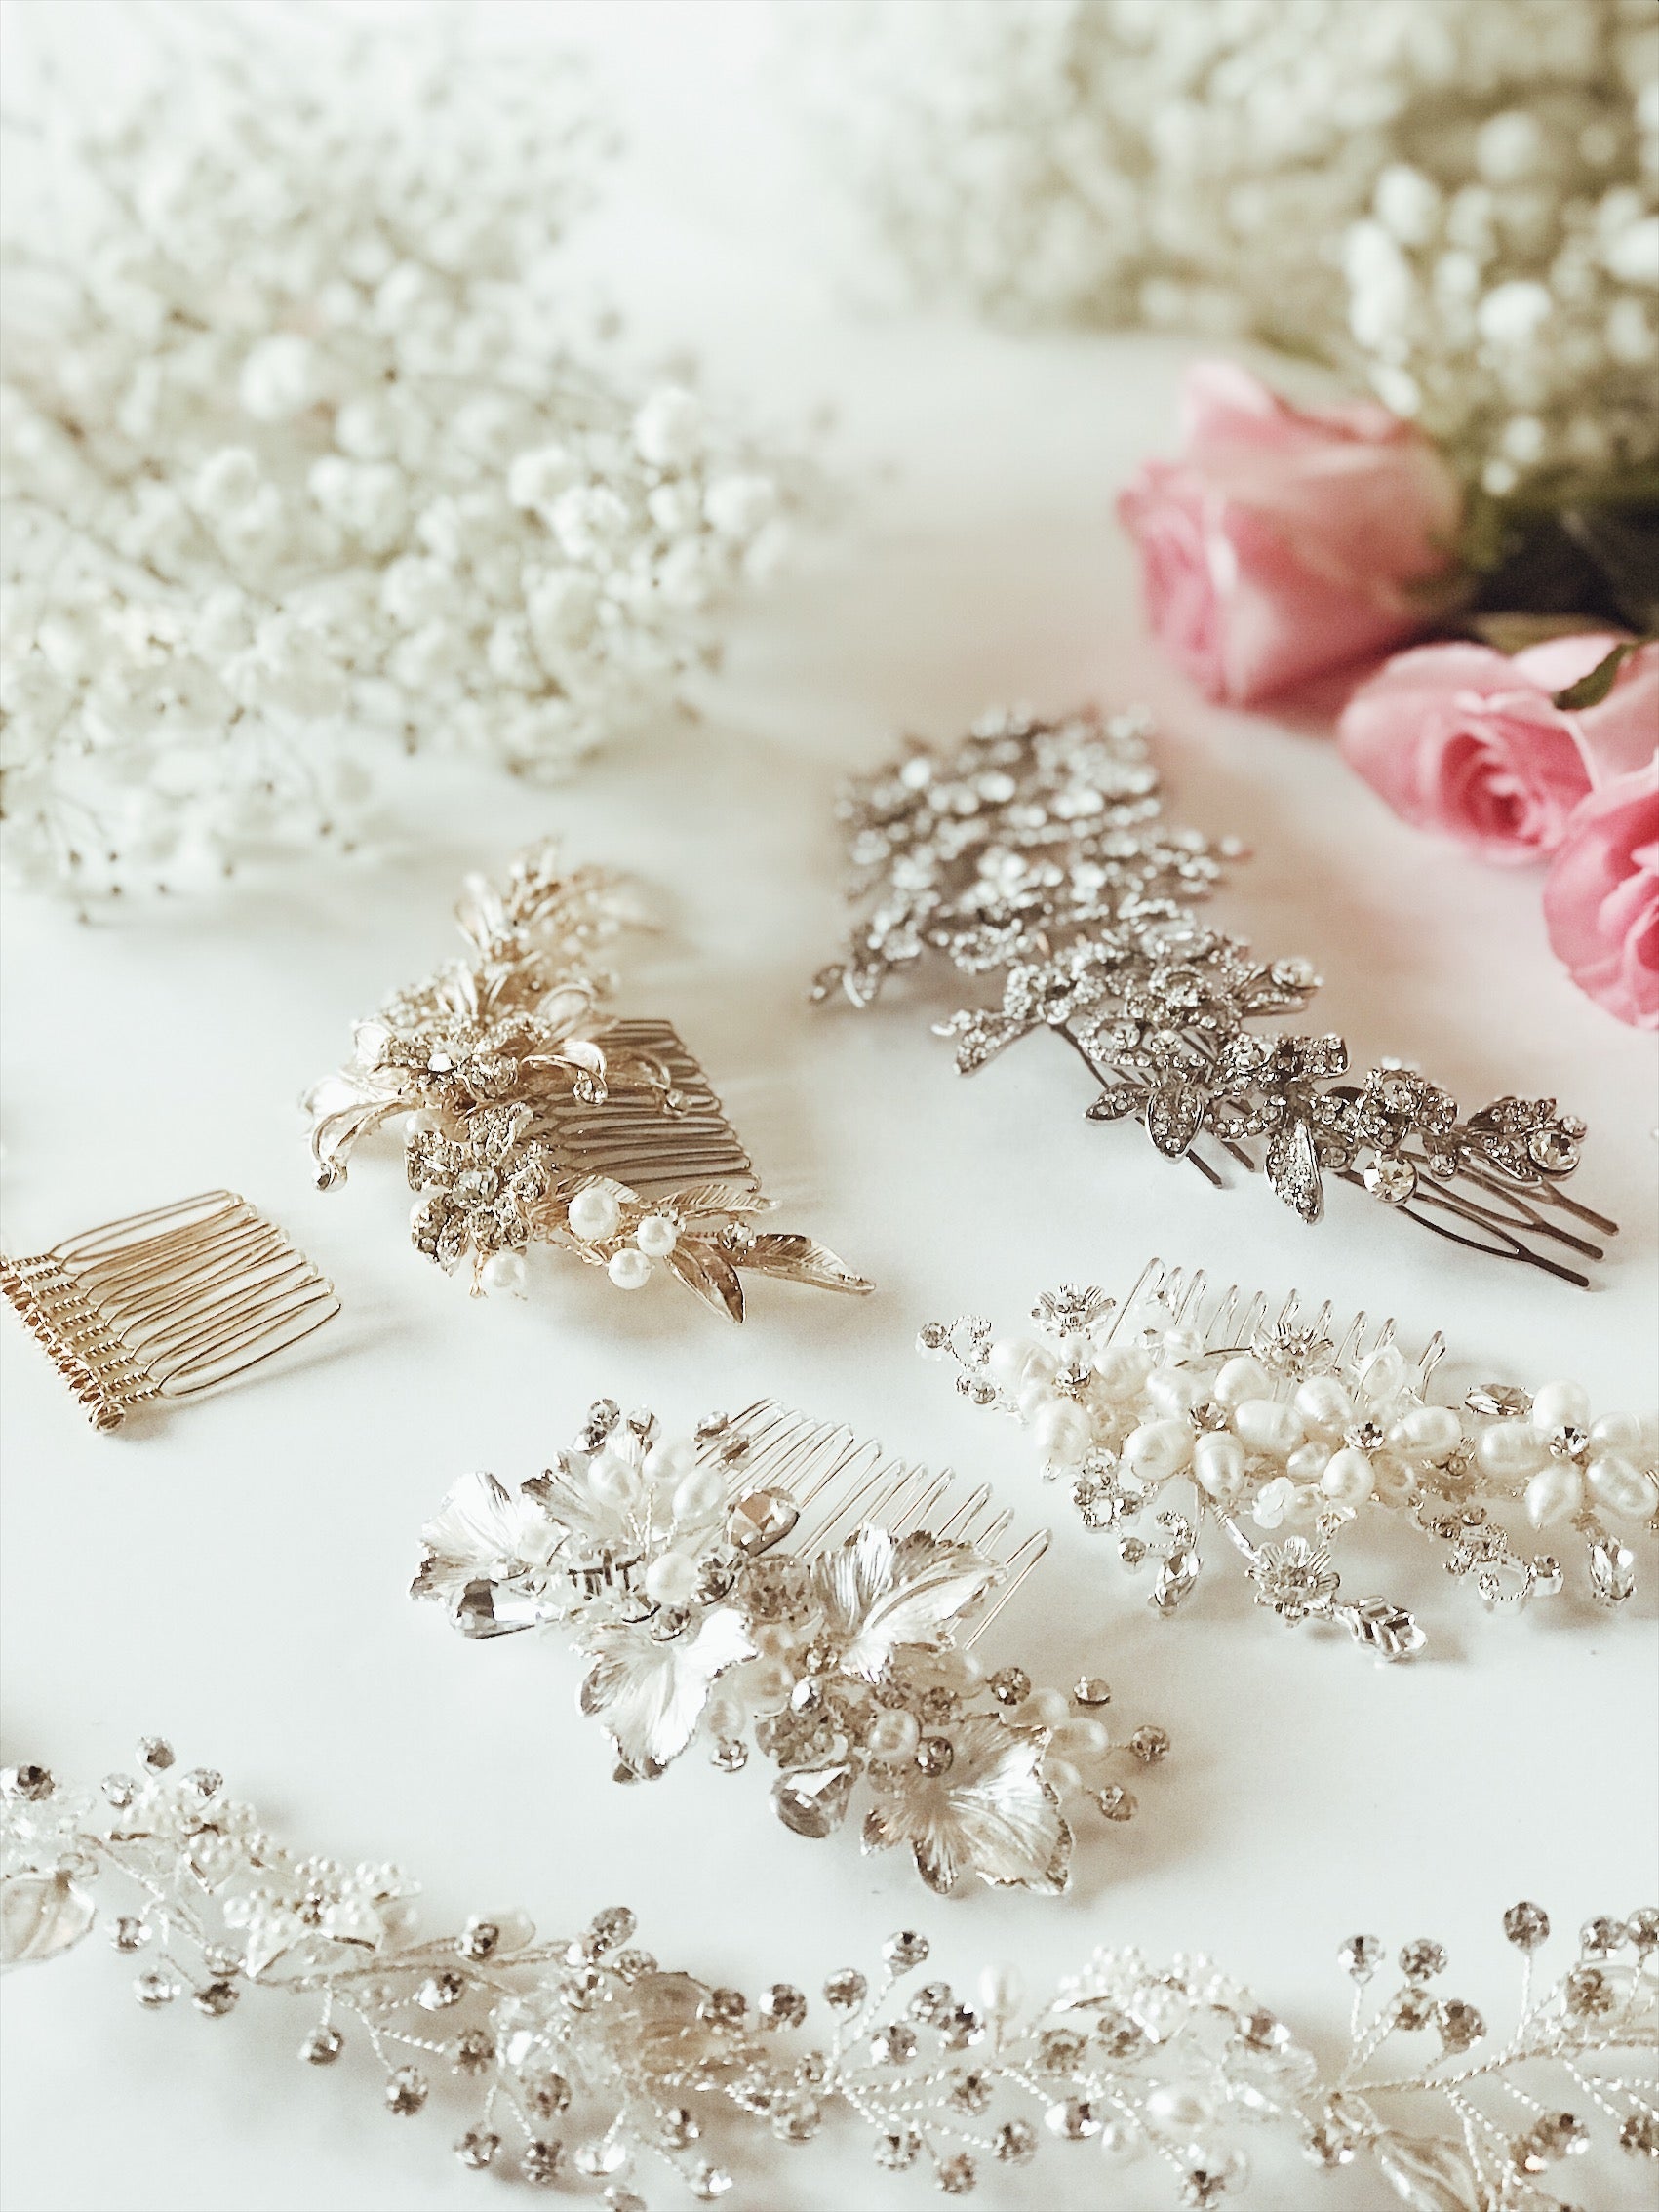 Lauren Elaine Bridal Accessories collection of hair combs and hair vine